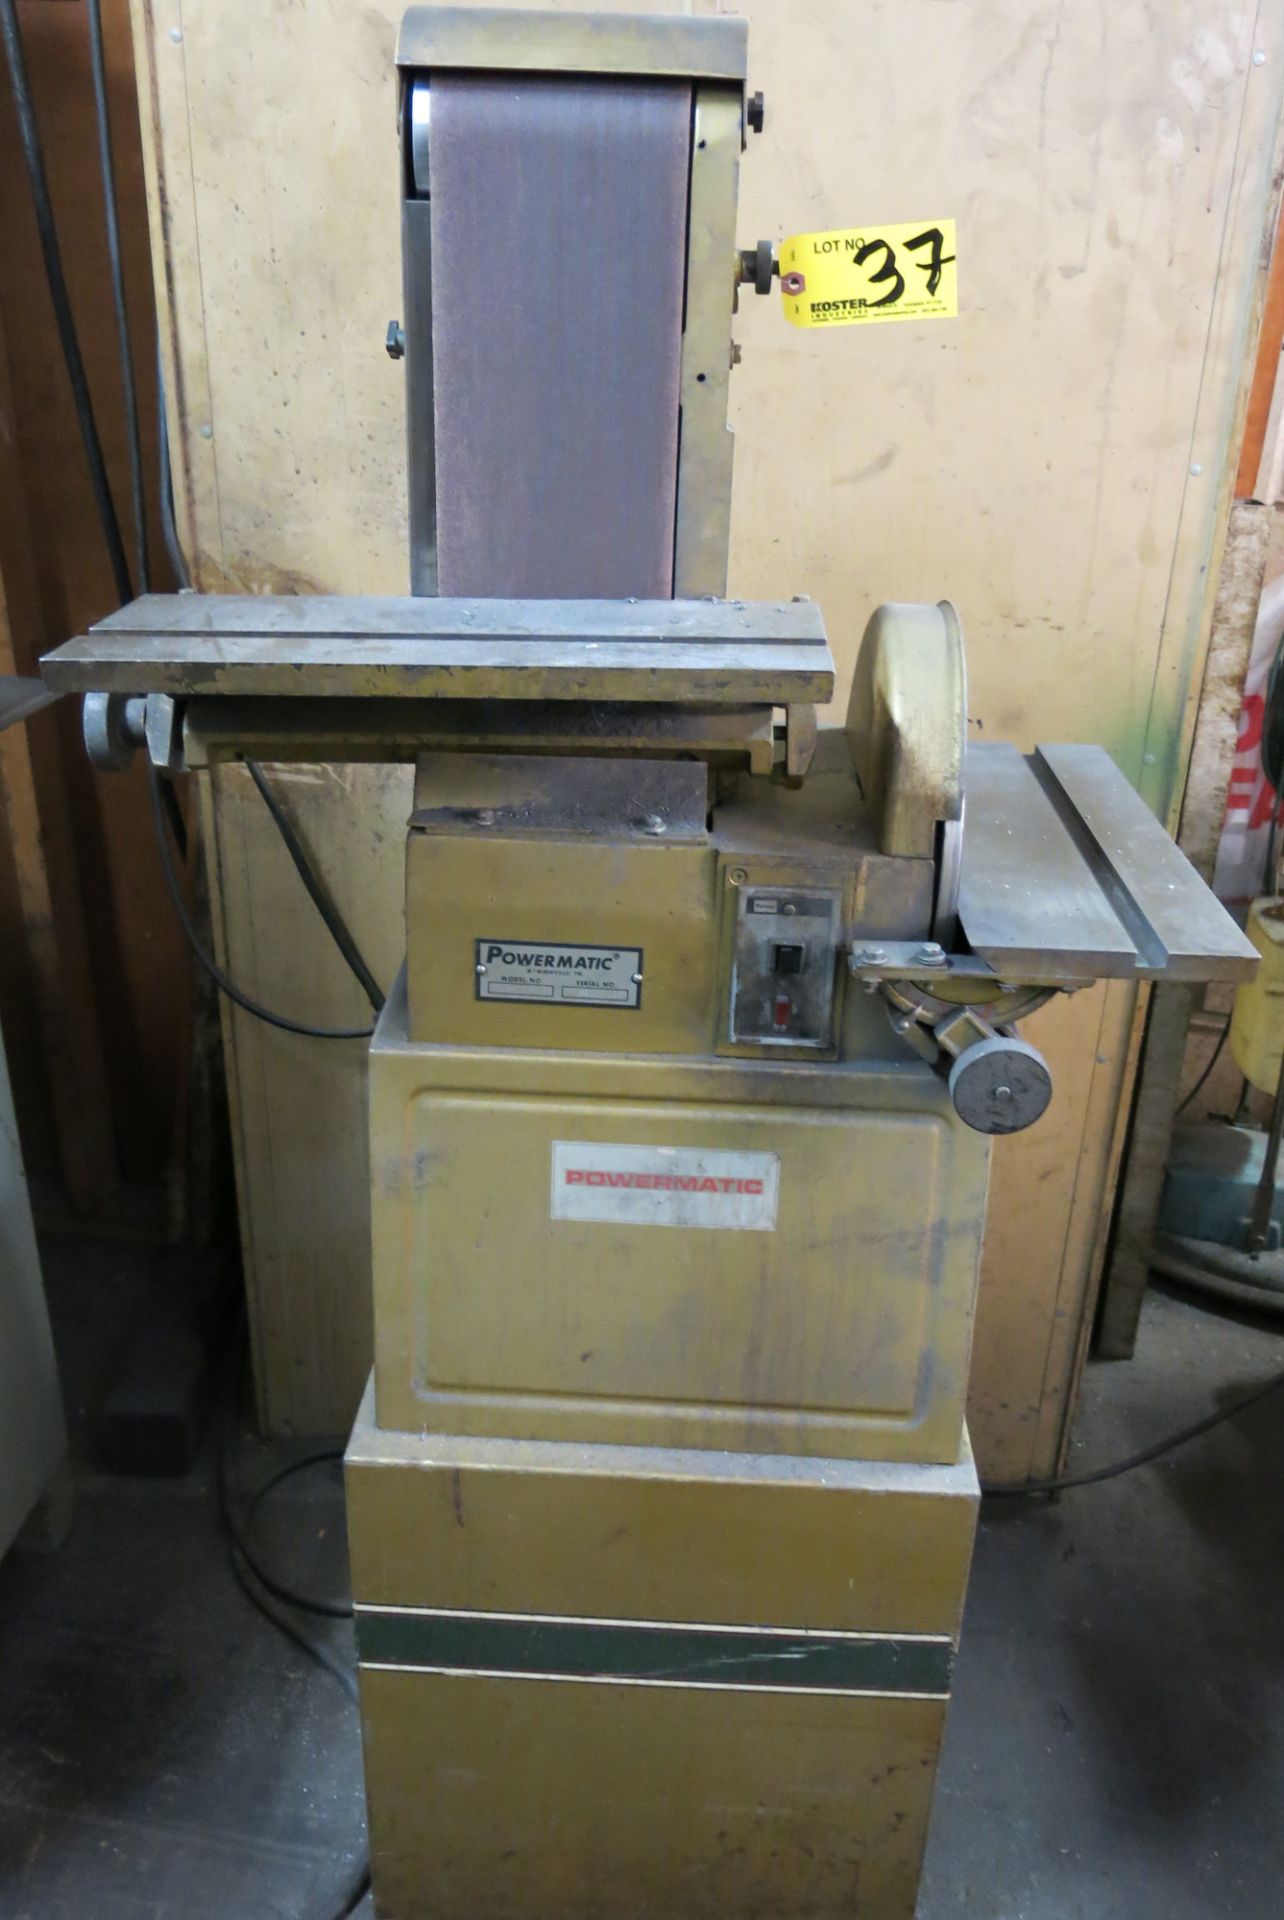 (1) POWERMATIC MDL. 30B 6" BELT 12" DISC SANDER WITH ADJUSTABLE ANGLED TABLES S/N: 88307008